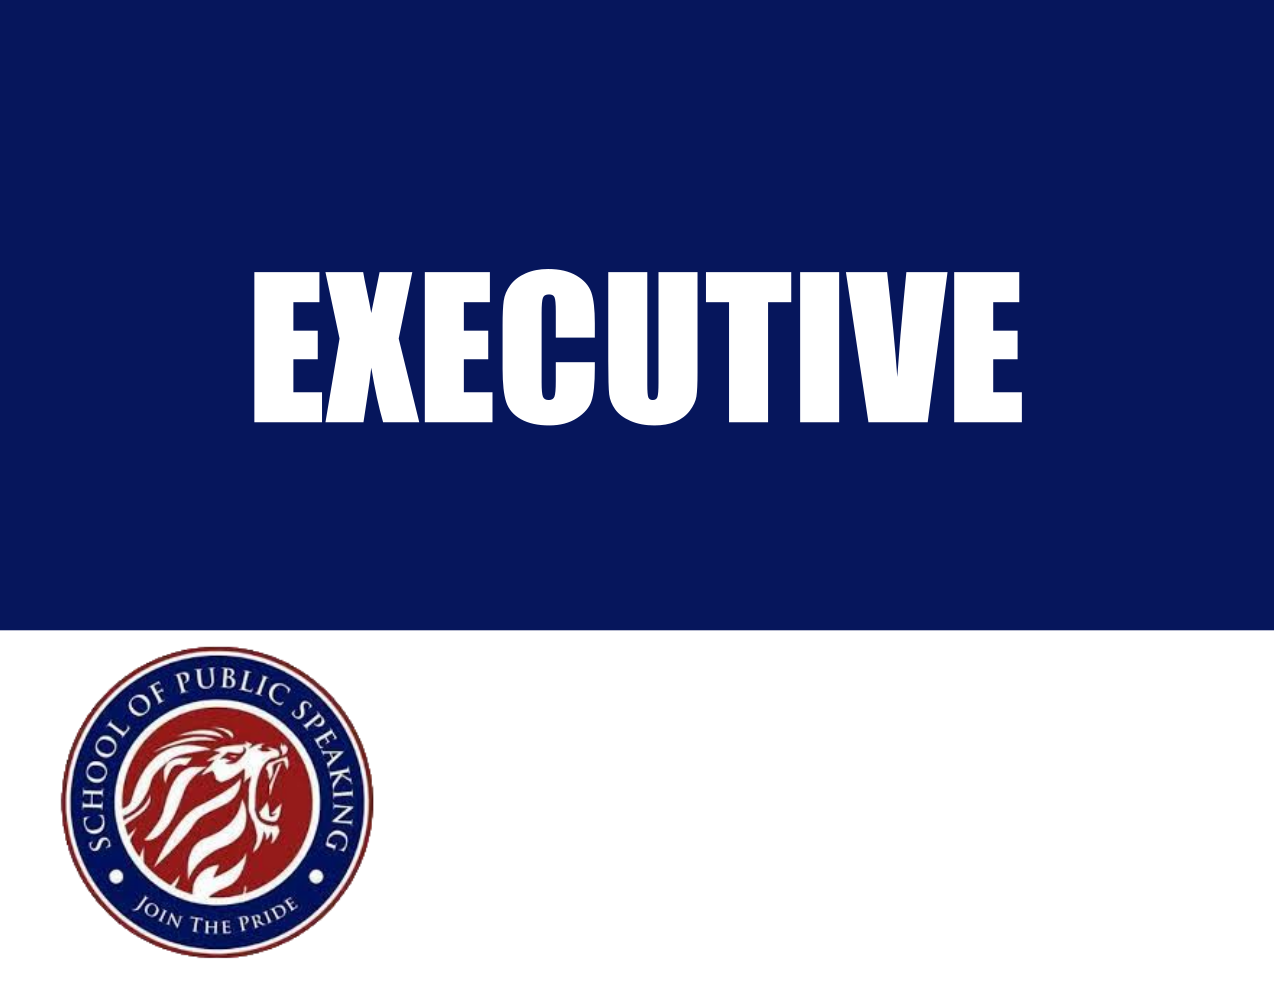 Executive Course (For Presidents, Government Officials, CEOs, Ministers):